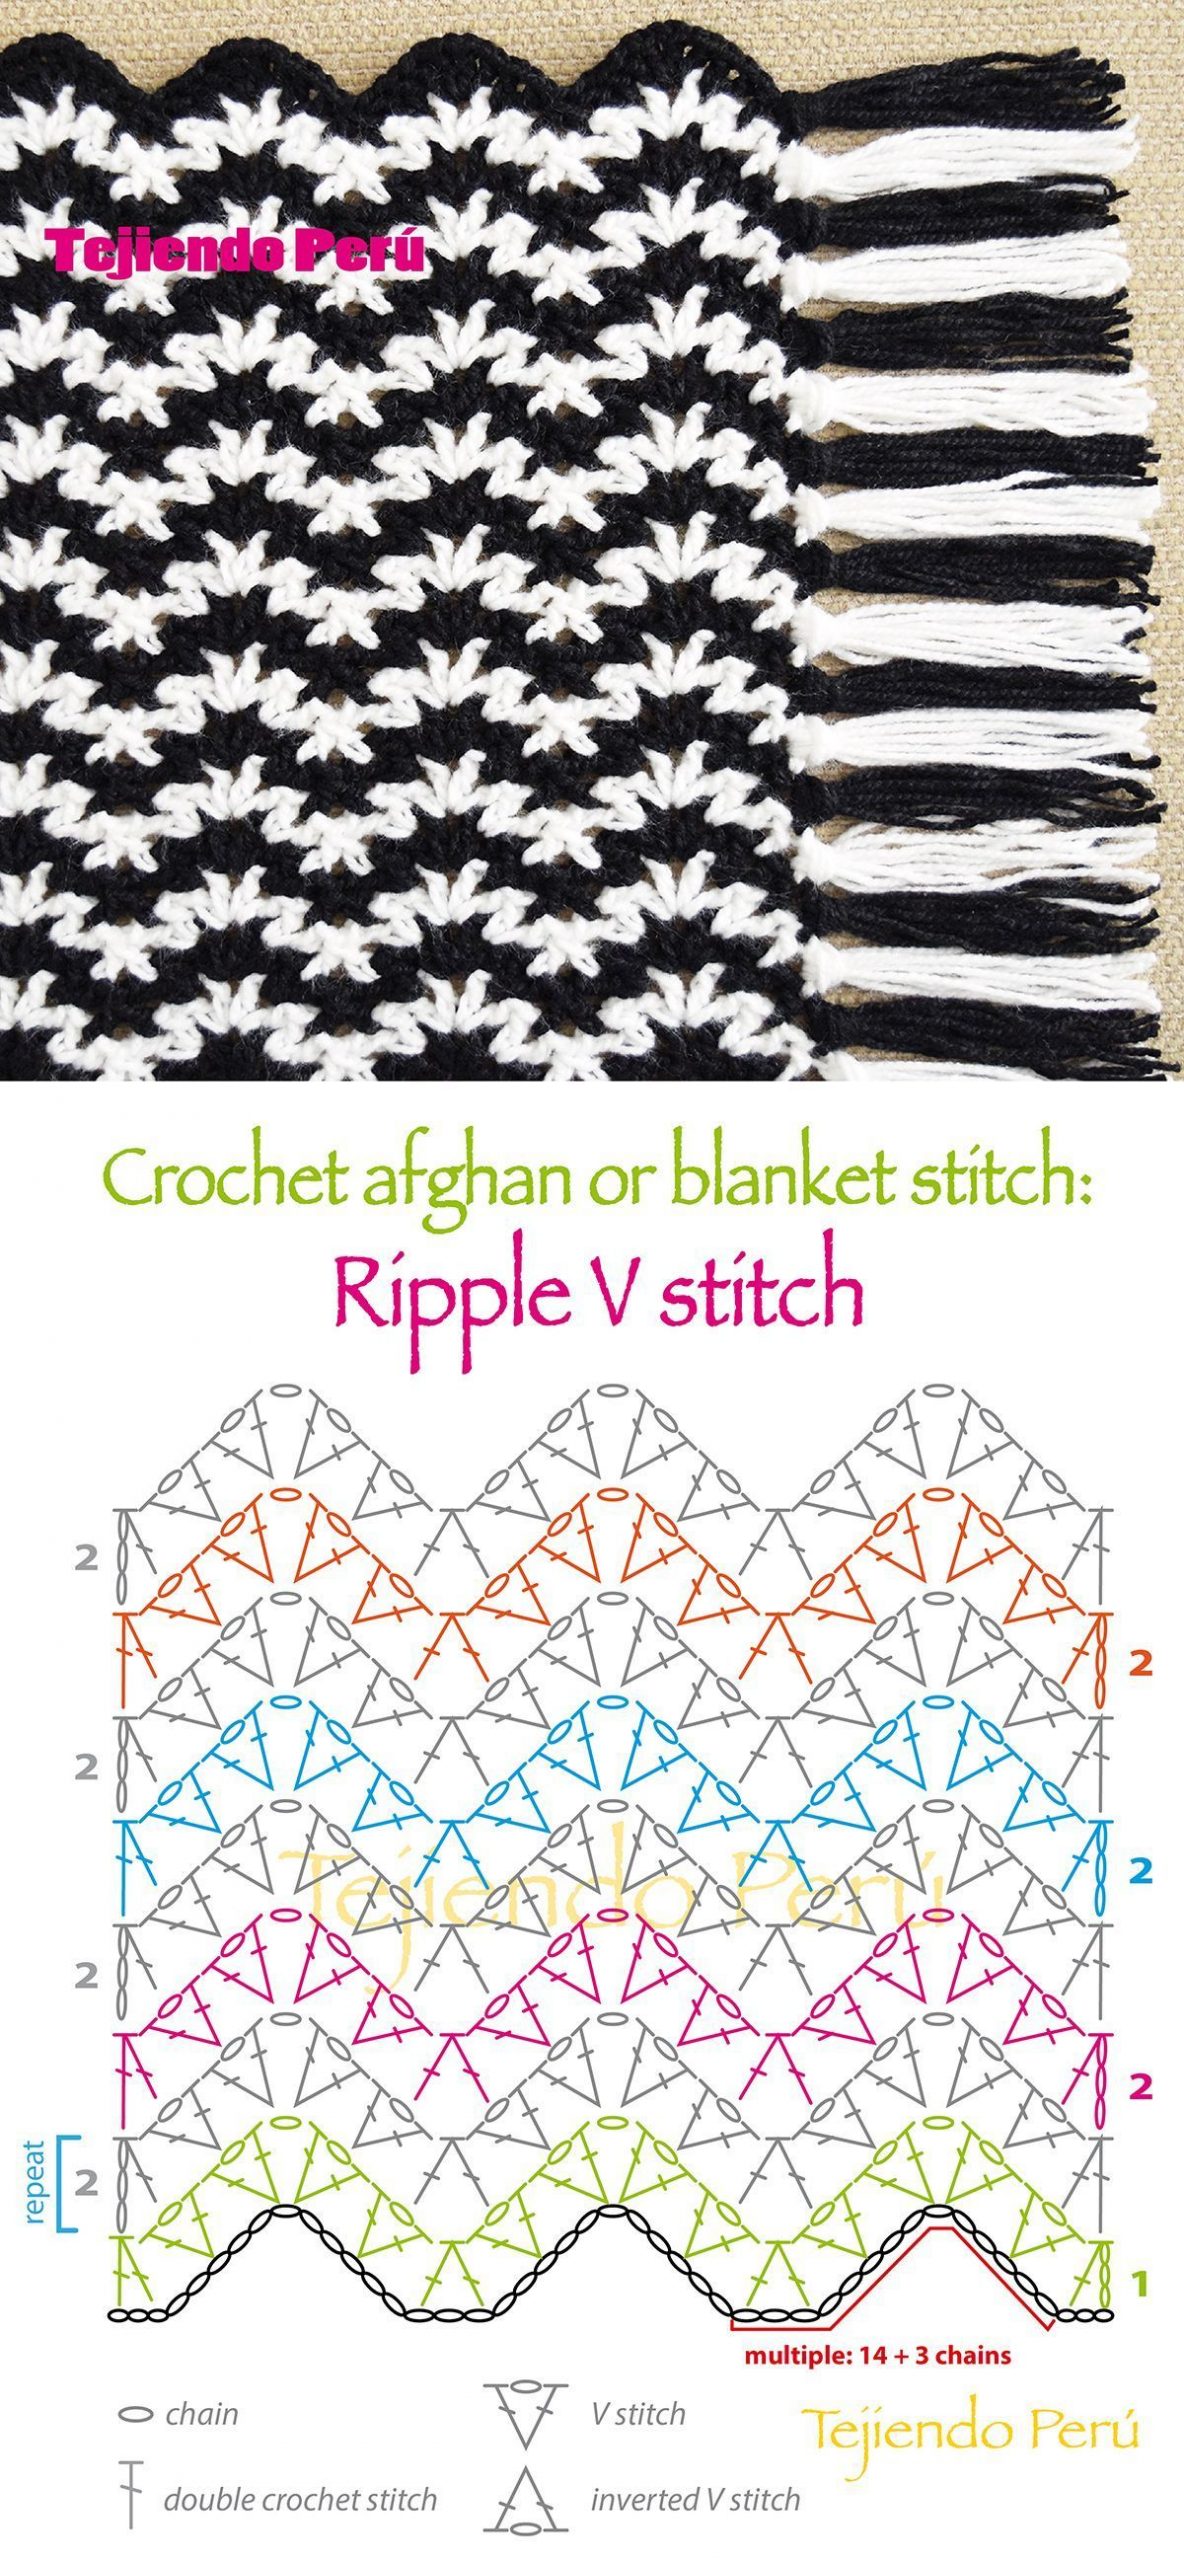 Newest No Cost Crocheting Stitches ripple Tips Crochet write-up stitches, the pl…